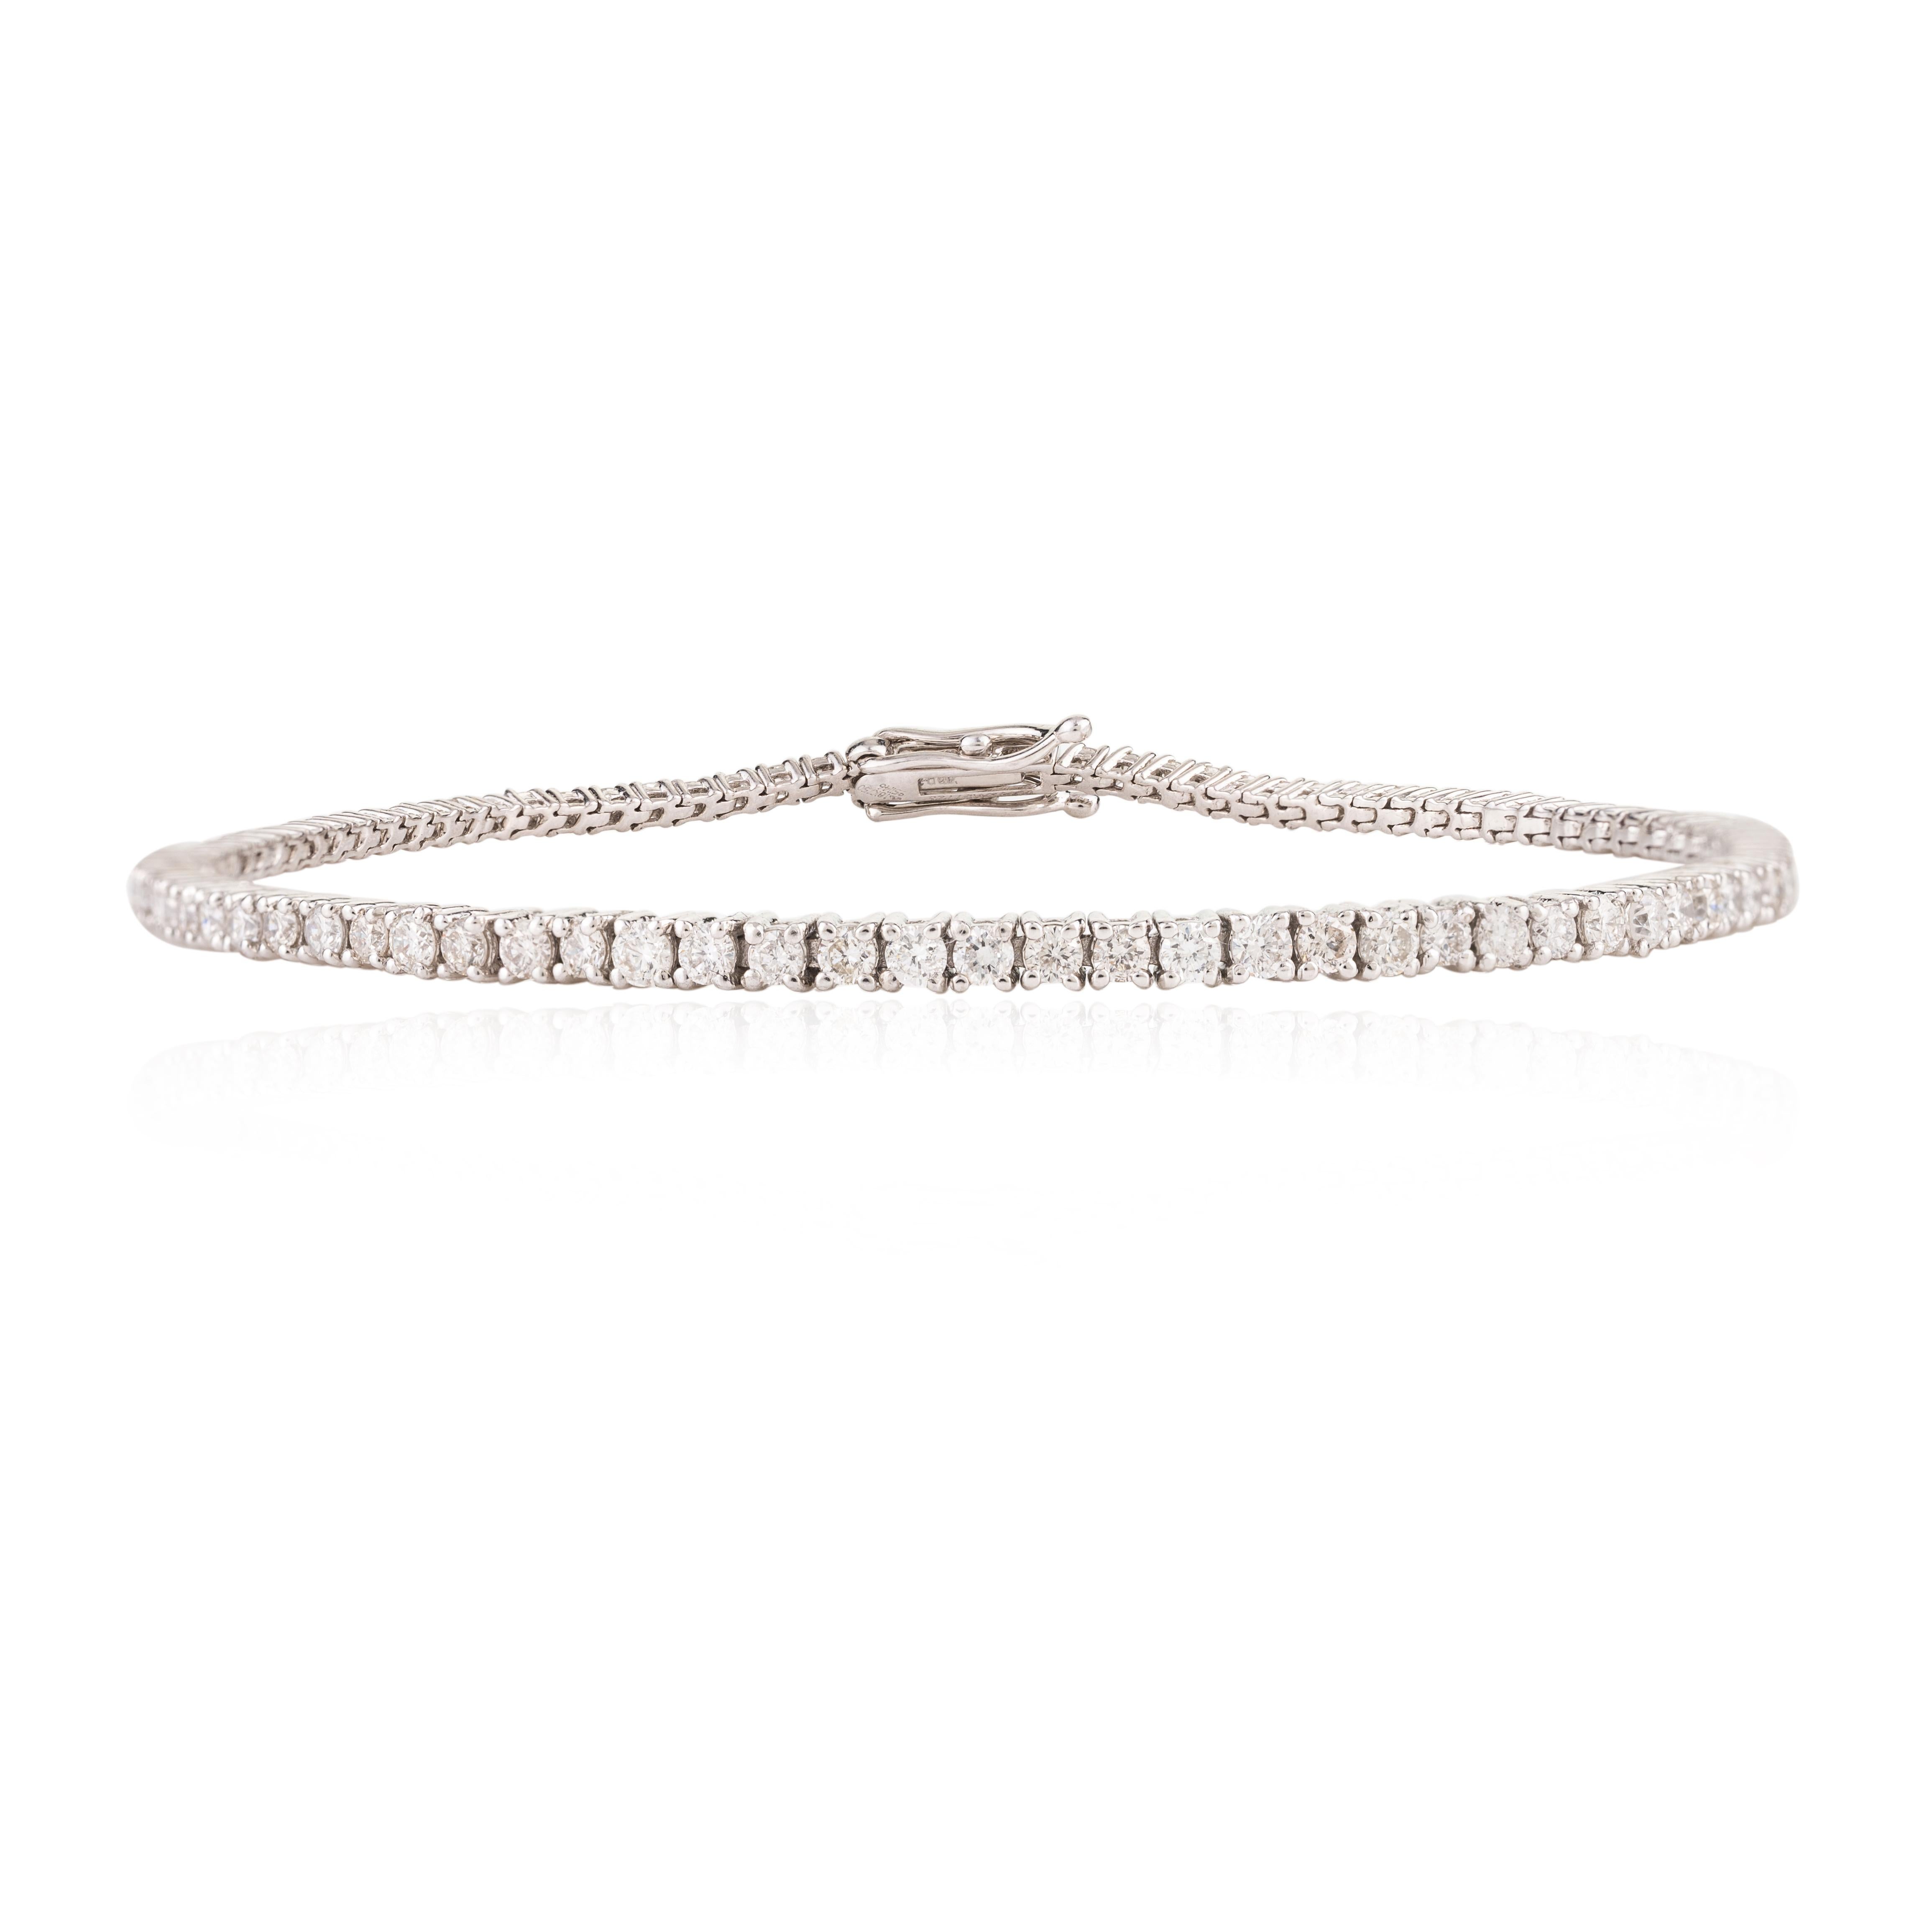 Certified 2.14 CTW Diamond Tennis Bracelet in 18 Karat Solid White Gold In New Condition For Sale In Houston, TX